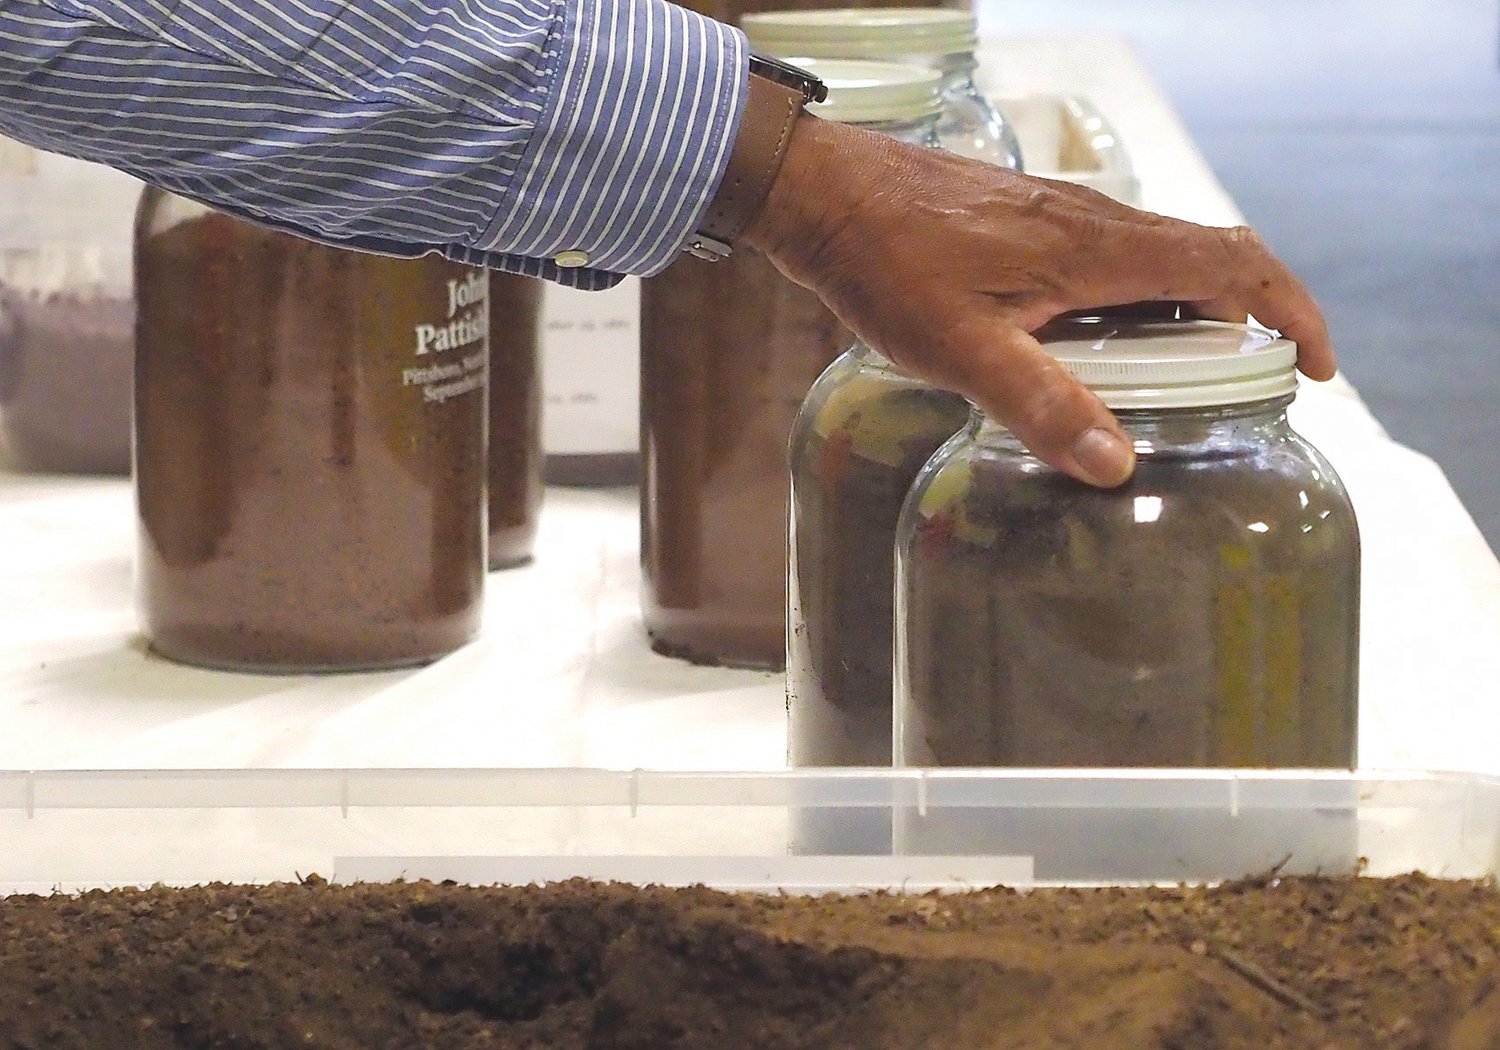 Two jars were filled from soil collected at the lynching sties of each of the five victims. One jar will reside in Chatham County, while the other will go to the Equal Justice Initiative's Legacy Museum in Alabama.